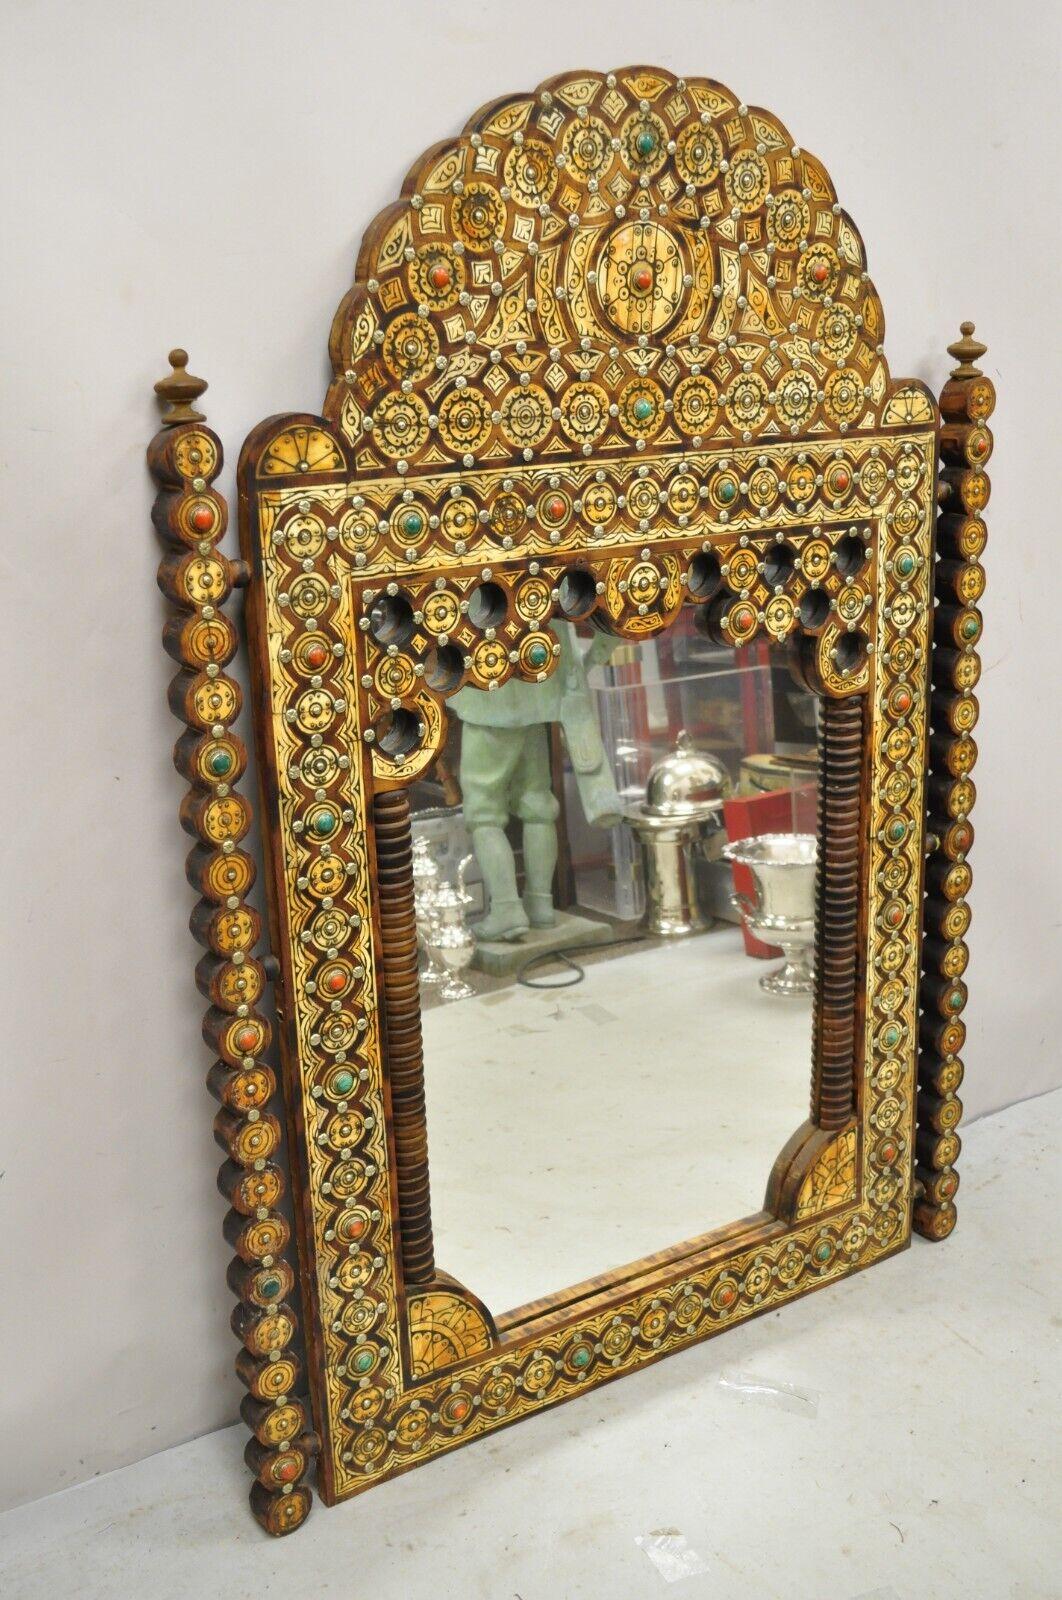 Vintage Moroccan Moorish Style carved wood mirror with Jewel Accents. Item features jewel and metal accents, nicely carved frame and finials, nice impressive size, very nice vintage item, great style and form. circa Mid to Late 20th Century.